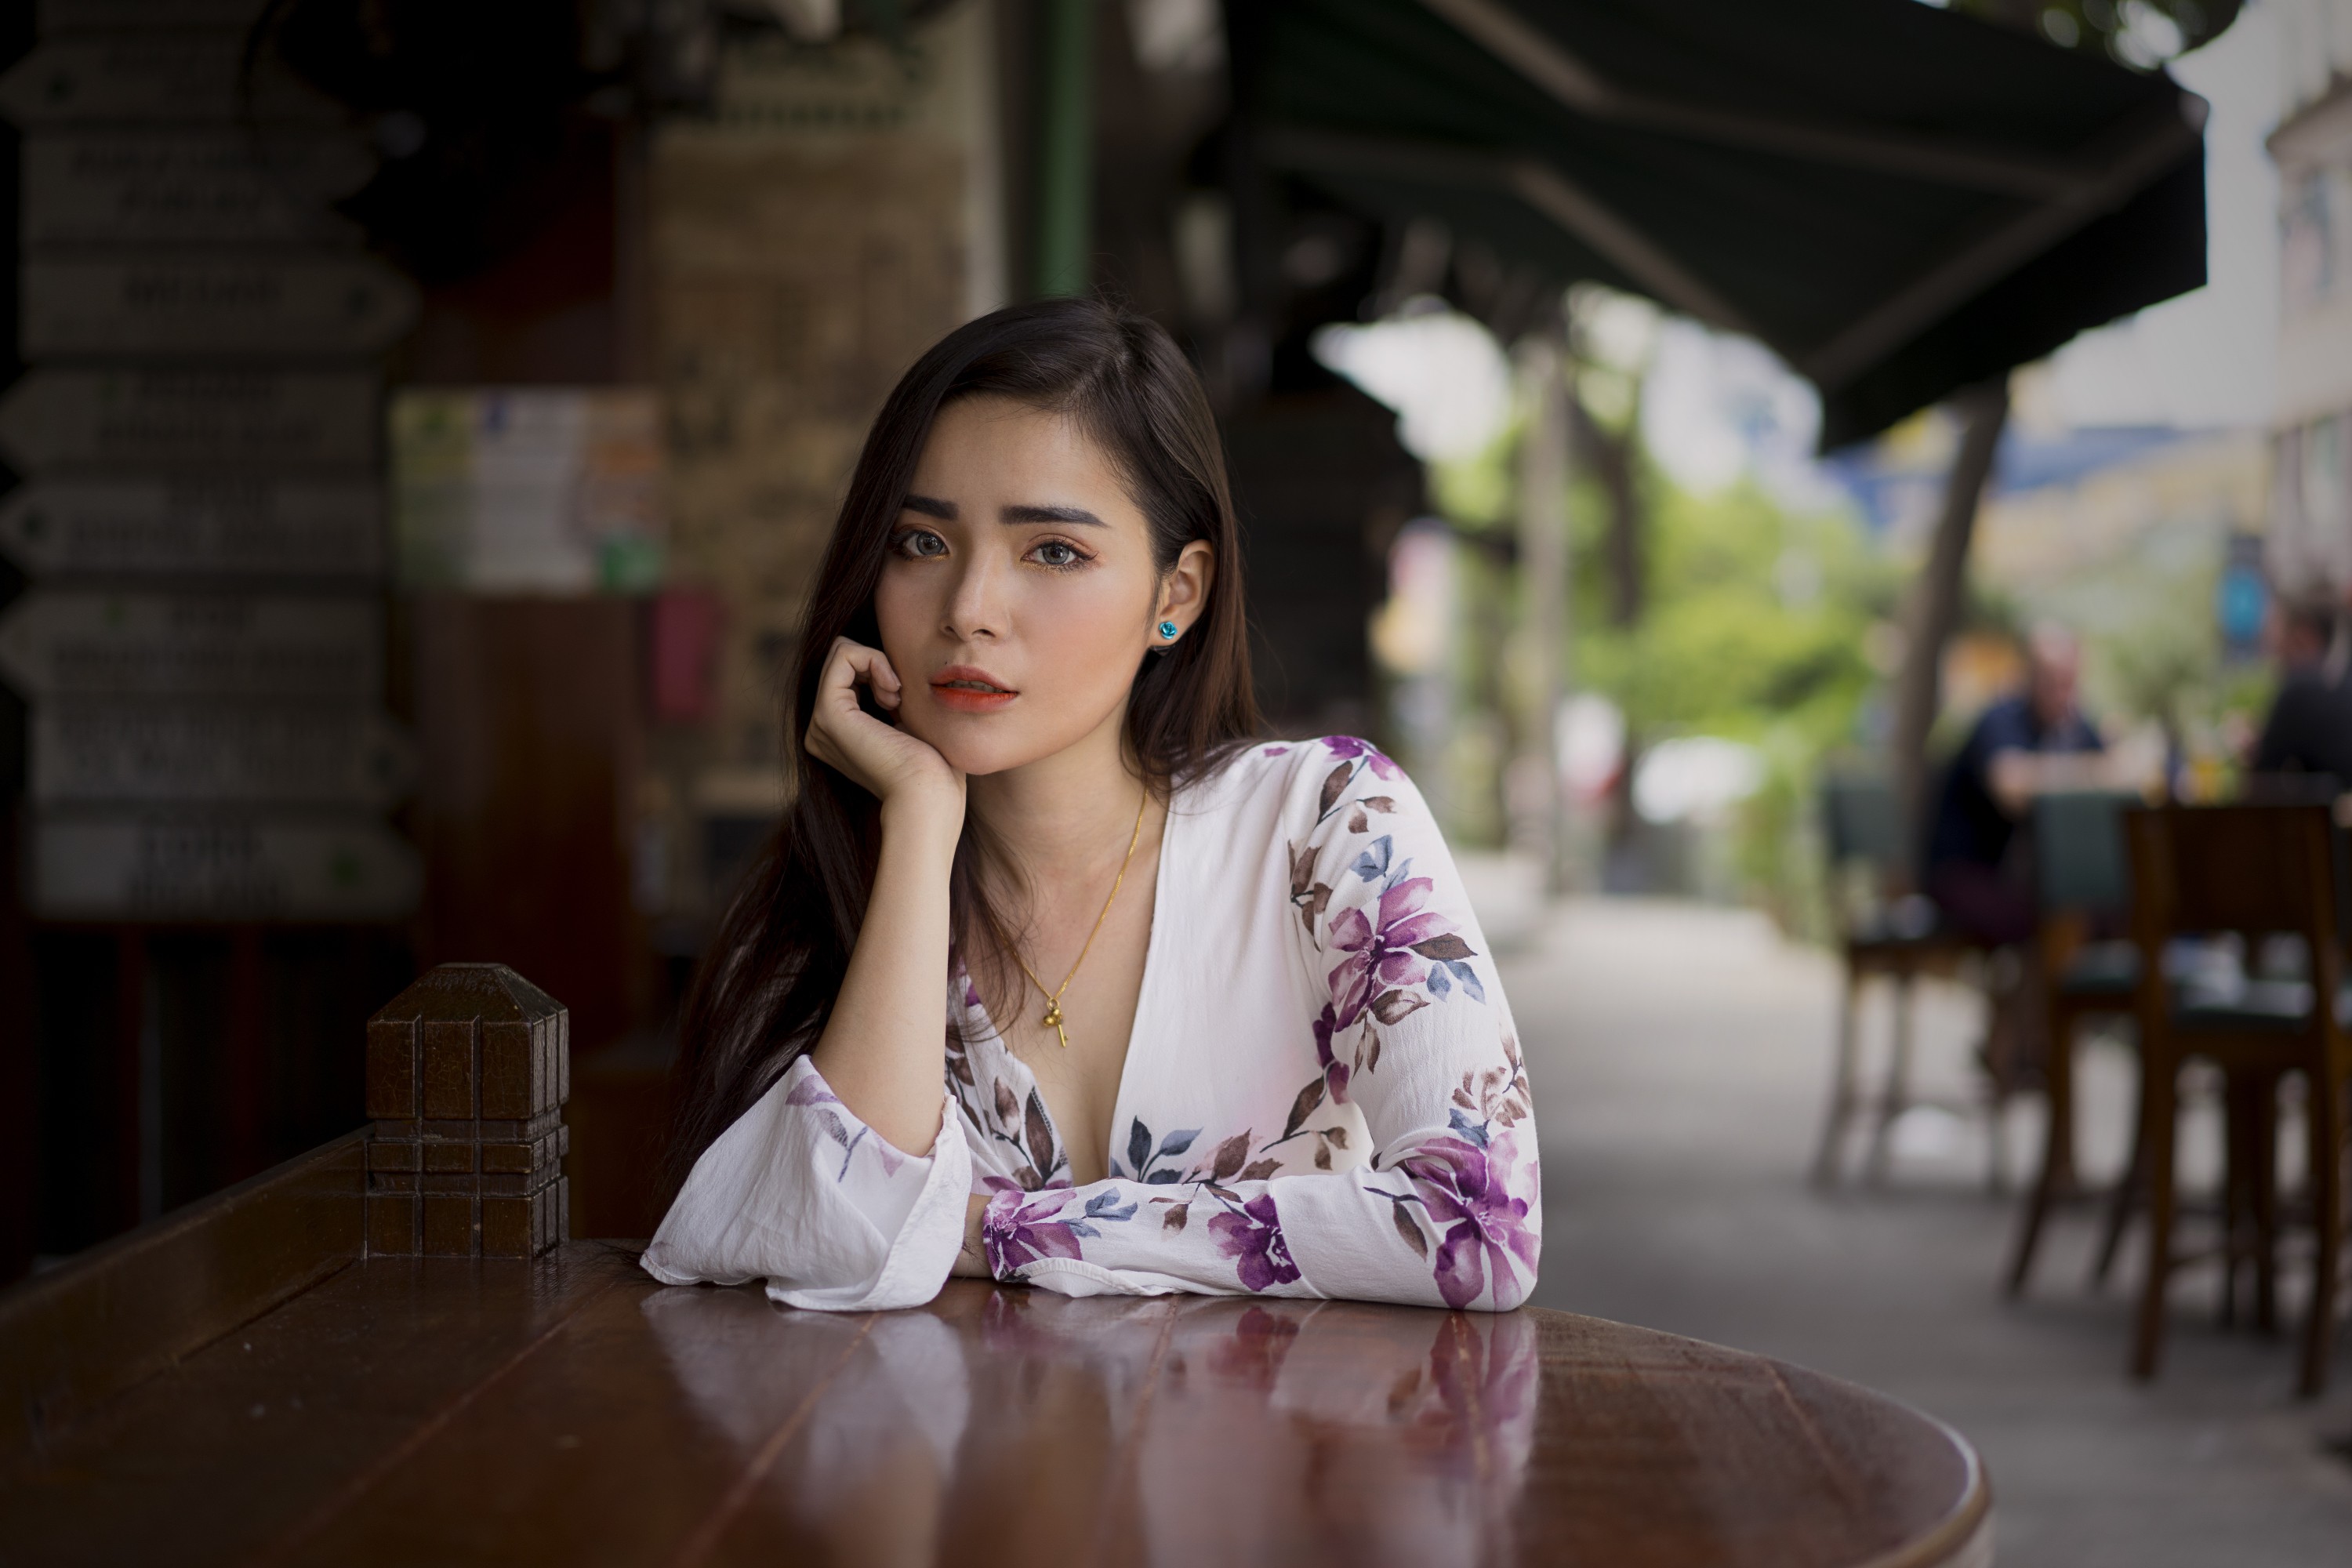 People 3000x2000 Asian women table urban city model looking at viewer women outdoors earring flower dress dress white clothing white dress red lipstick makeup sitting long hair